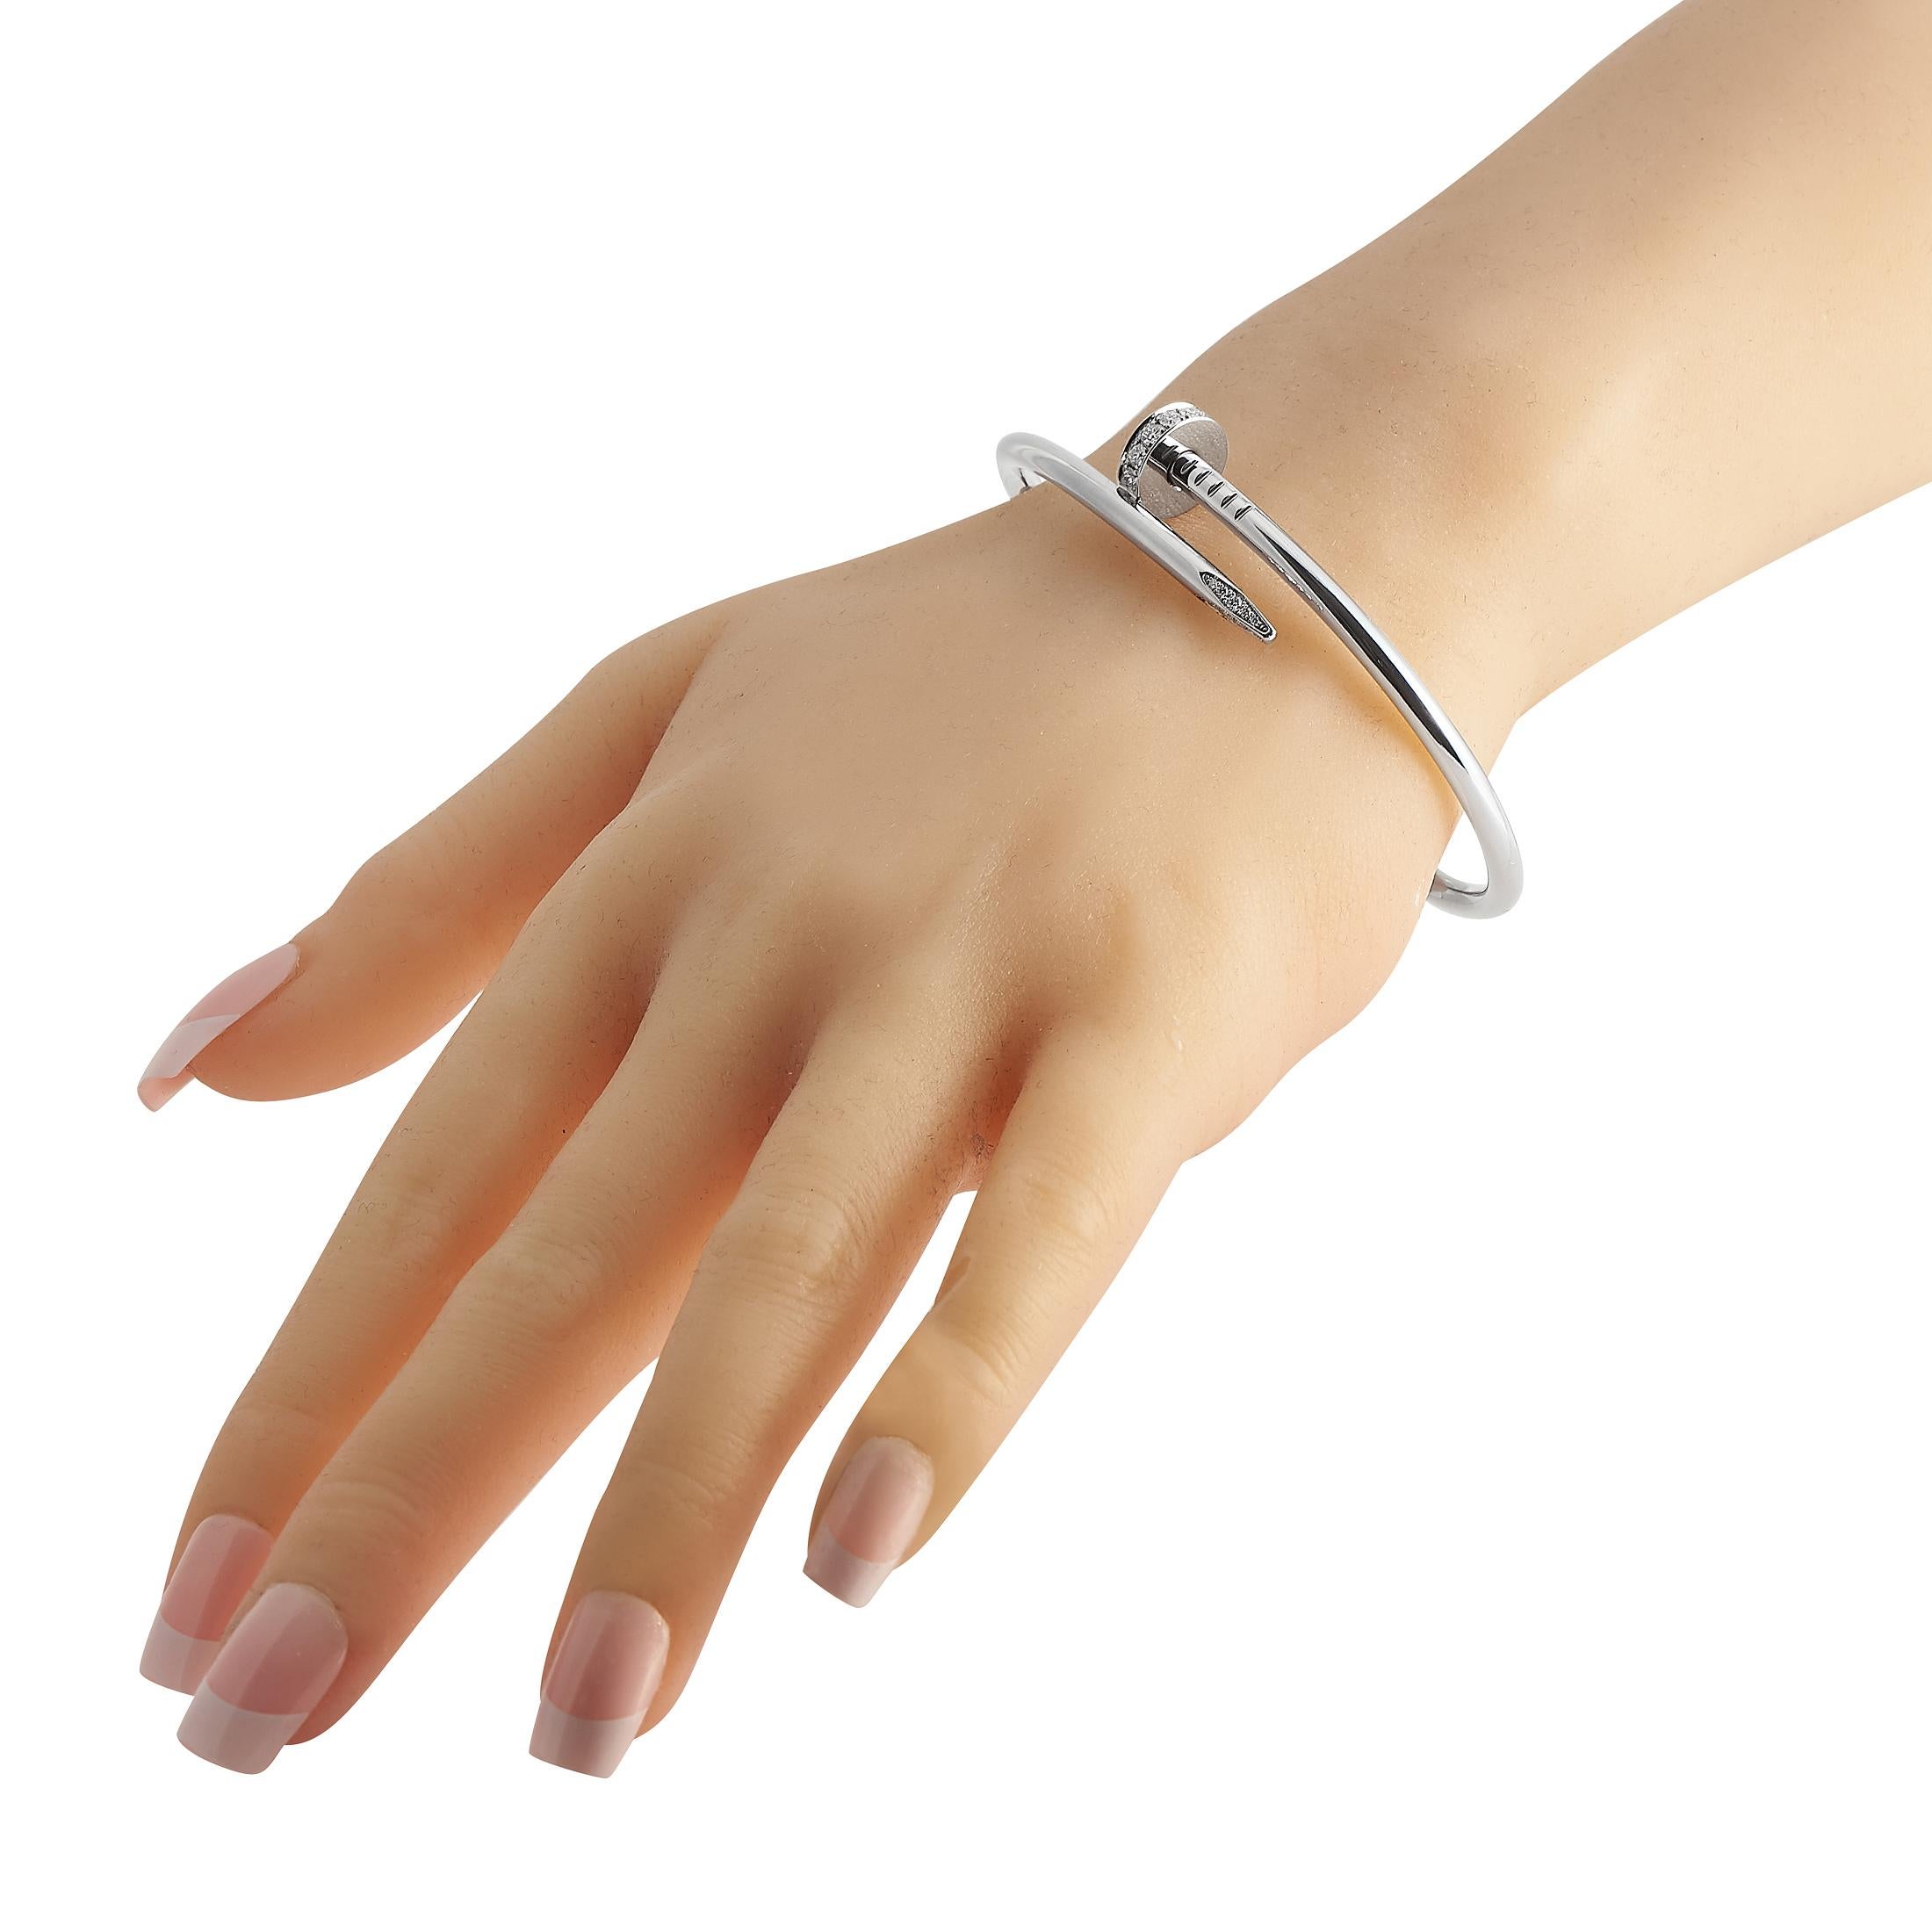 The Cartier Juste un Clou 18K White Gold Diamond Ladies Bangle Bracelet is your classic white gold diamond bracelet with an edgy twist. It features Cartier's popular nail motif where the nail silhouette is shaped into a rigid bracelet complete with